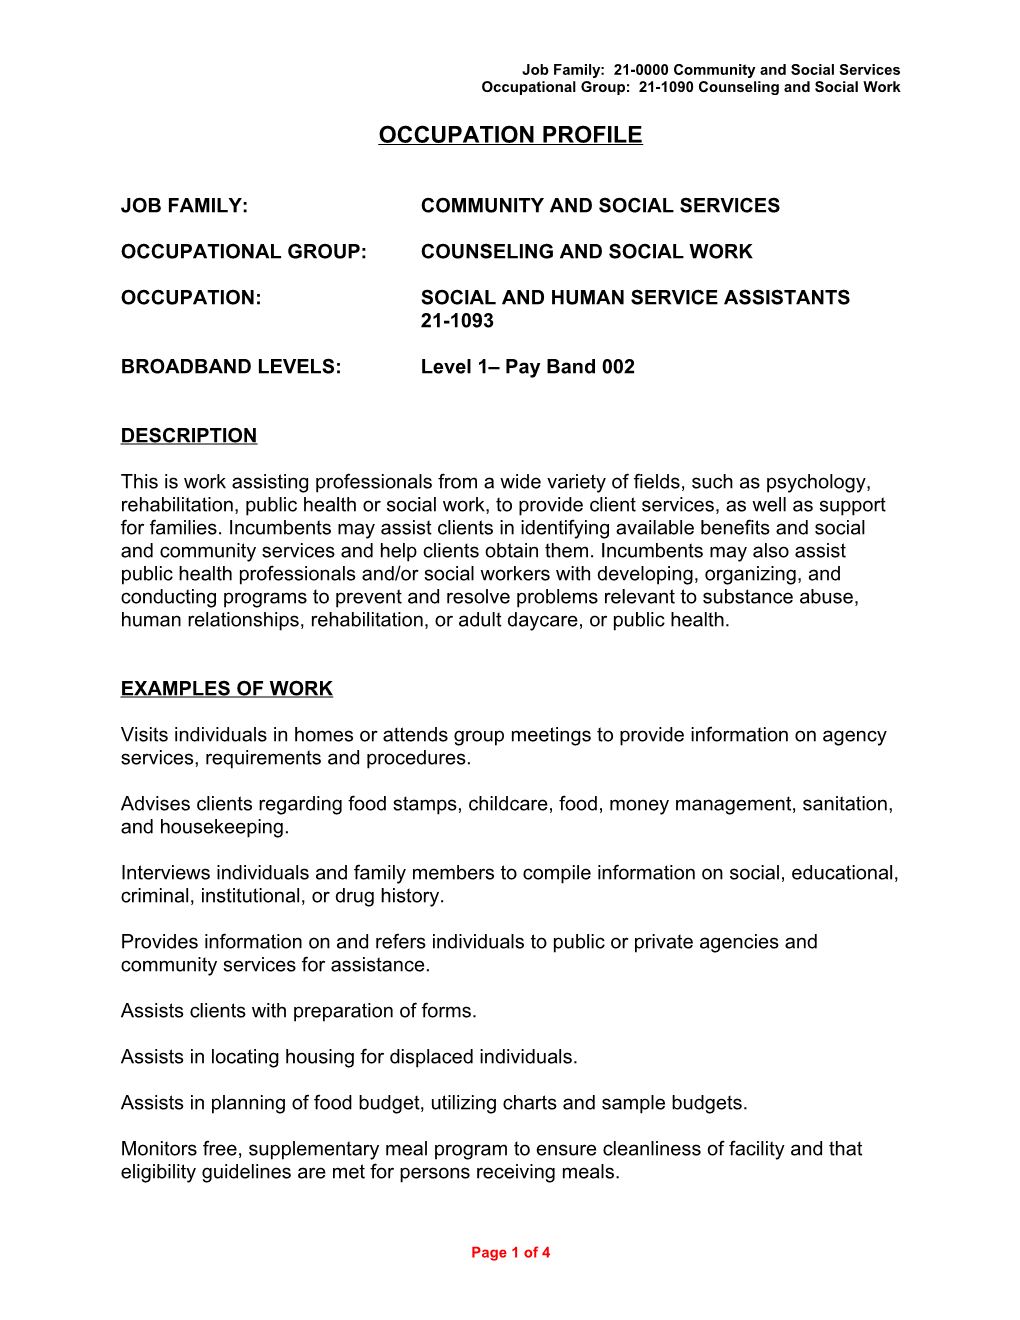 Job Family: 21-0000 Community and Social Services